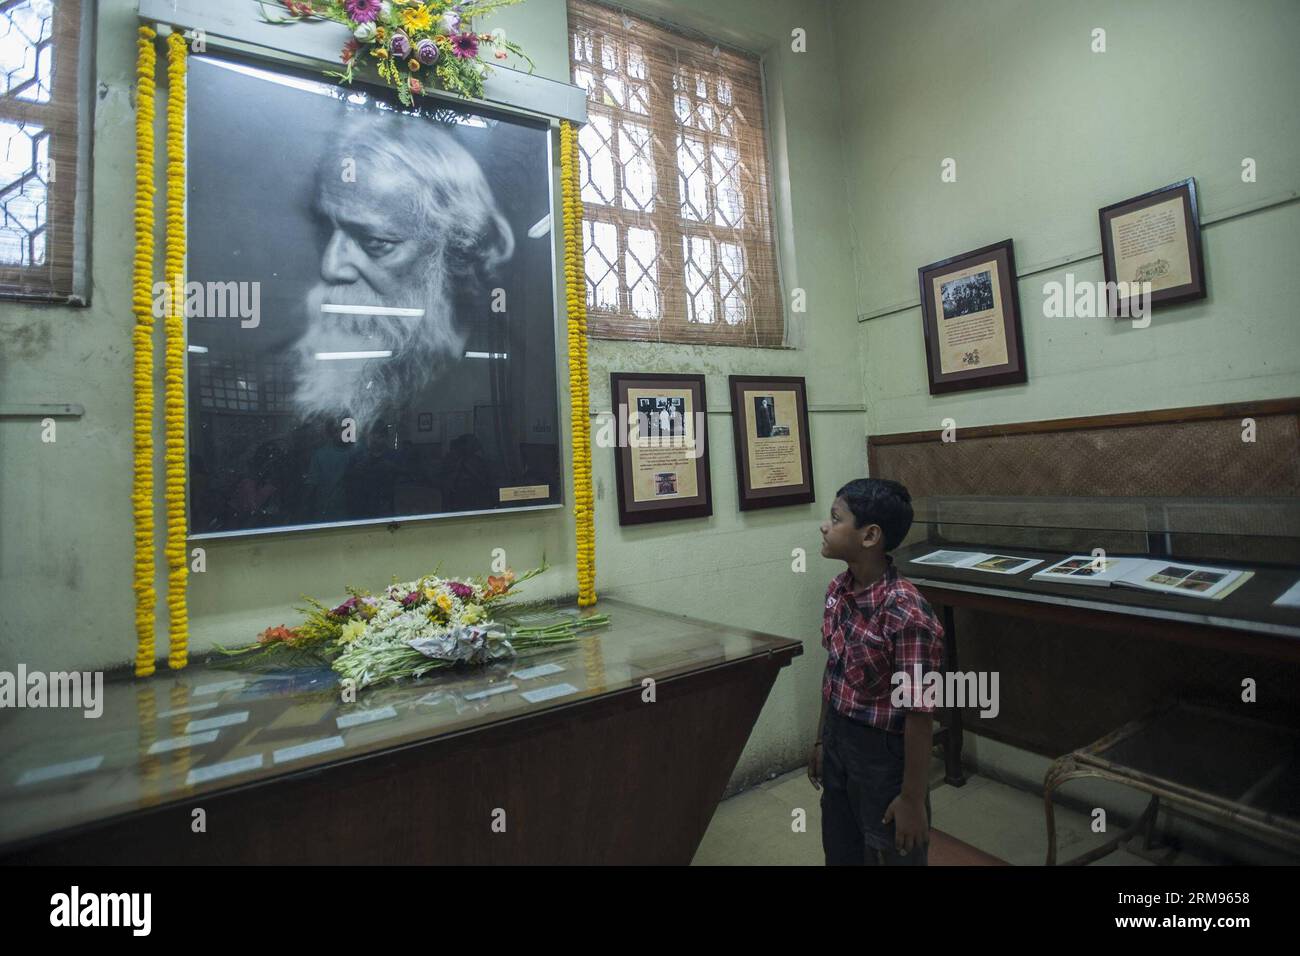 (140509) -- CALCUTTA, May 9, 2014 (Xinhua) -- A boy looks at a photo of Rabindranath Tagore in the Nobel laureate s house during a celebration of Tagore s birth anniversary in Calcutta, east of India on May 9, 2014. (Xinhua Photo/Tumpa Mondal) (lmz) INDIA-TAGORE-ANNIVERSARY PUBLICATIONxNOTxINxCHN   Calcutta May 9 2014 XINHUA a Boy Looks AT a Photo of Rabindranath Tagore in The Nobel Laureate S House during a Celebration of Tagore S Birth Anniversary in Calcutta East of India ON May 9 2014 XINHUA Photo Tumpa Mondal  India Tagore Anniversary PUBLICATIONxNOTxINxCHN Stock Photo